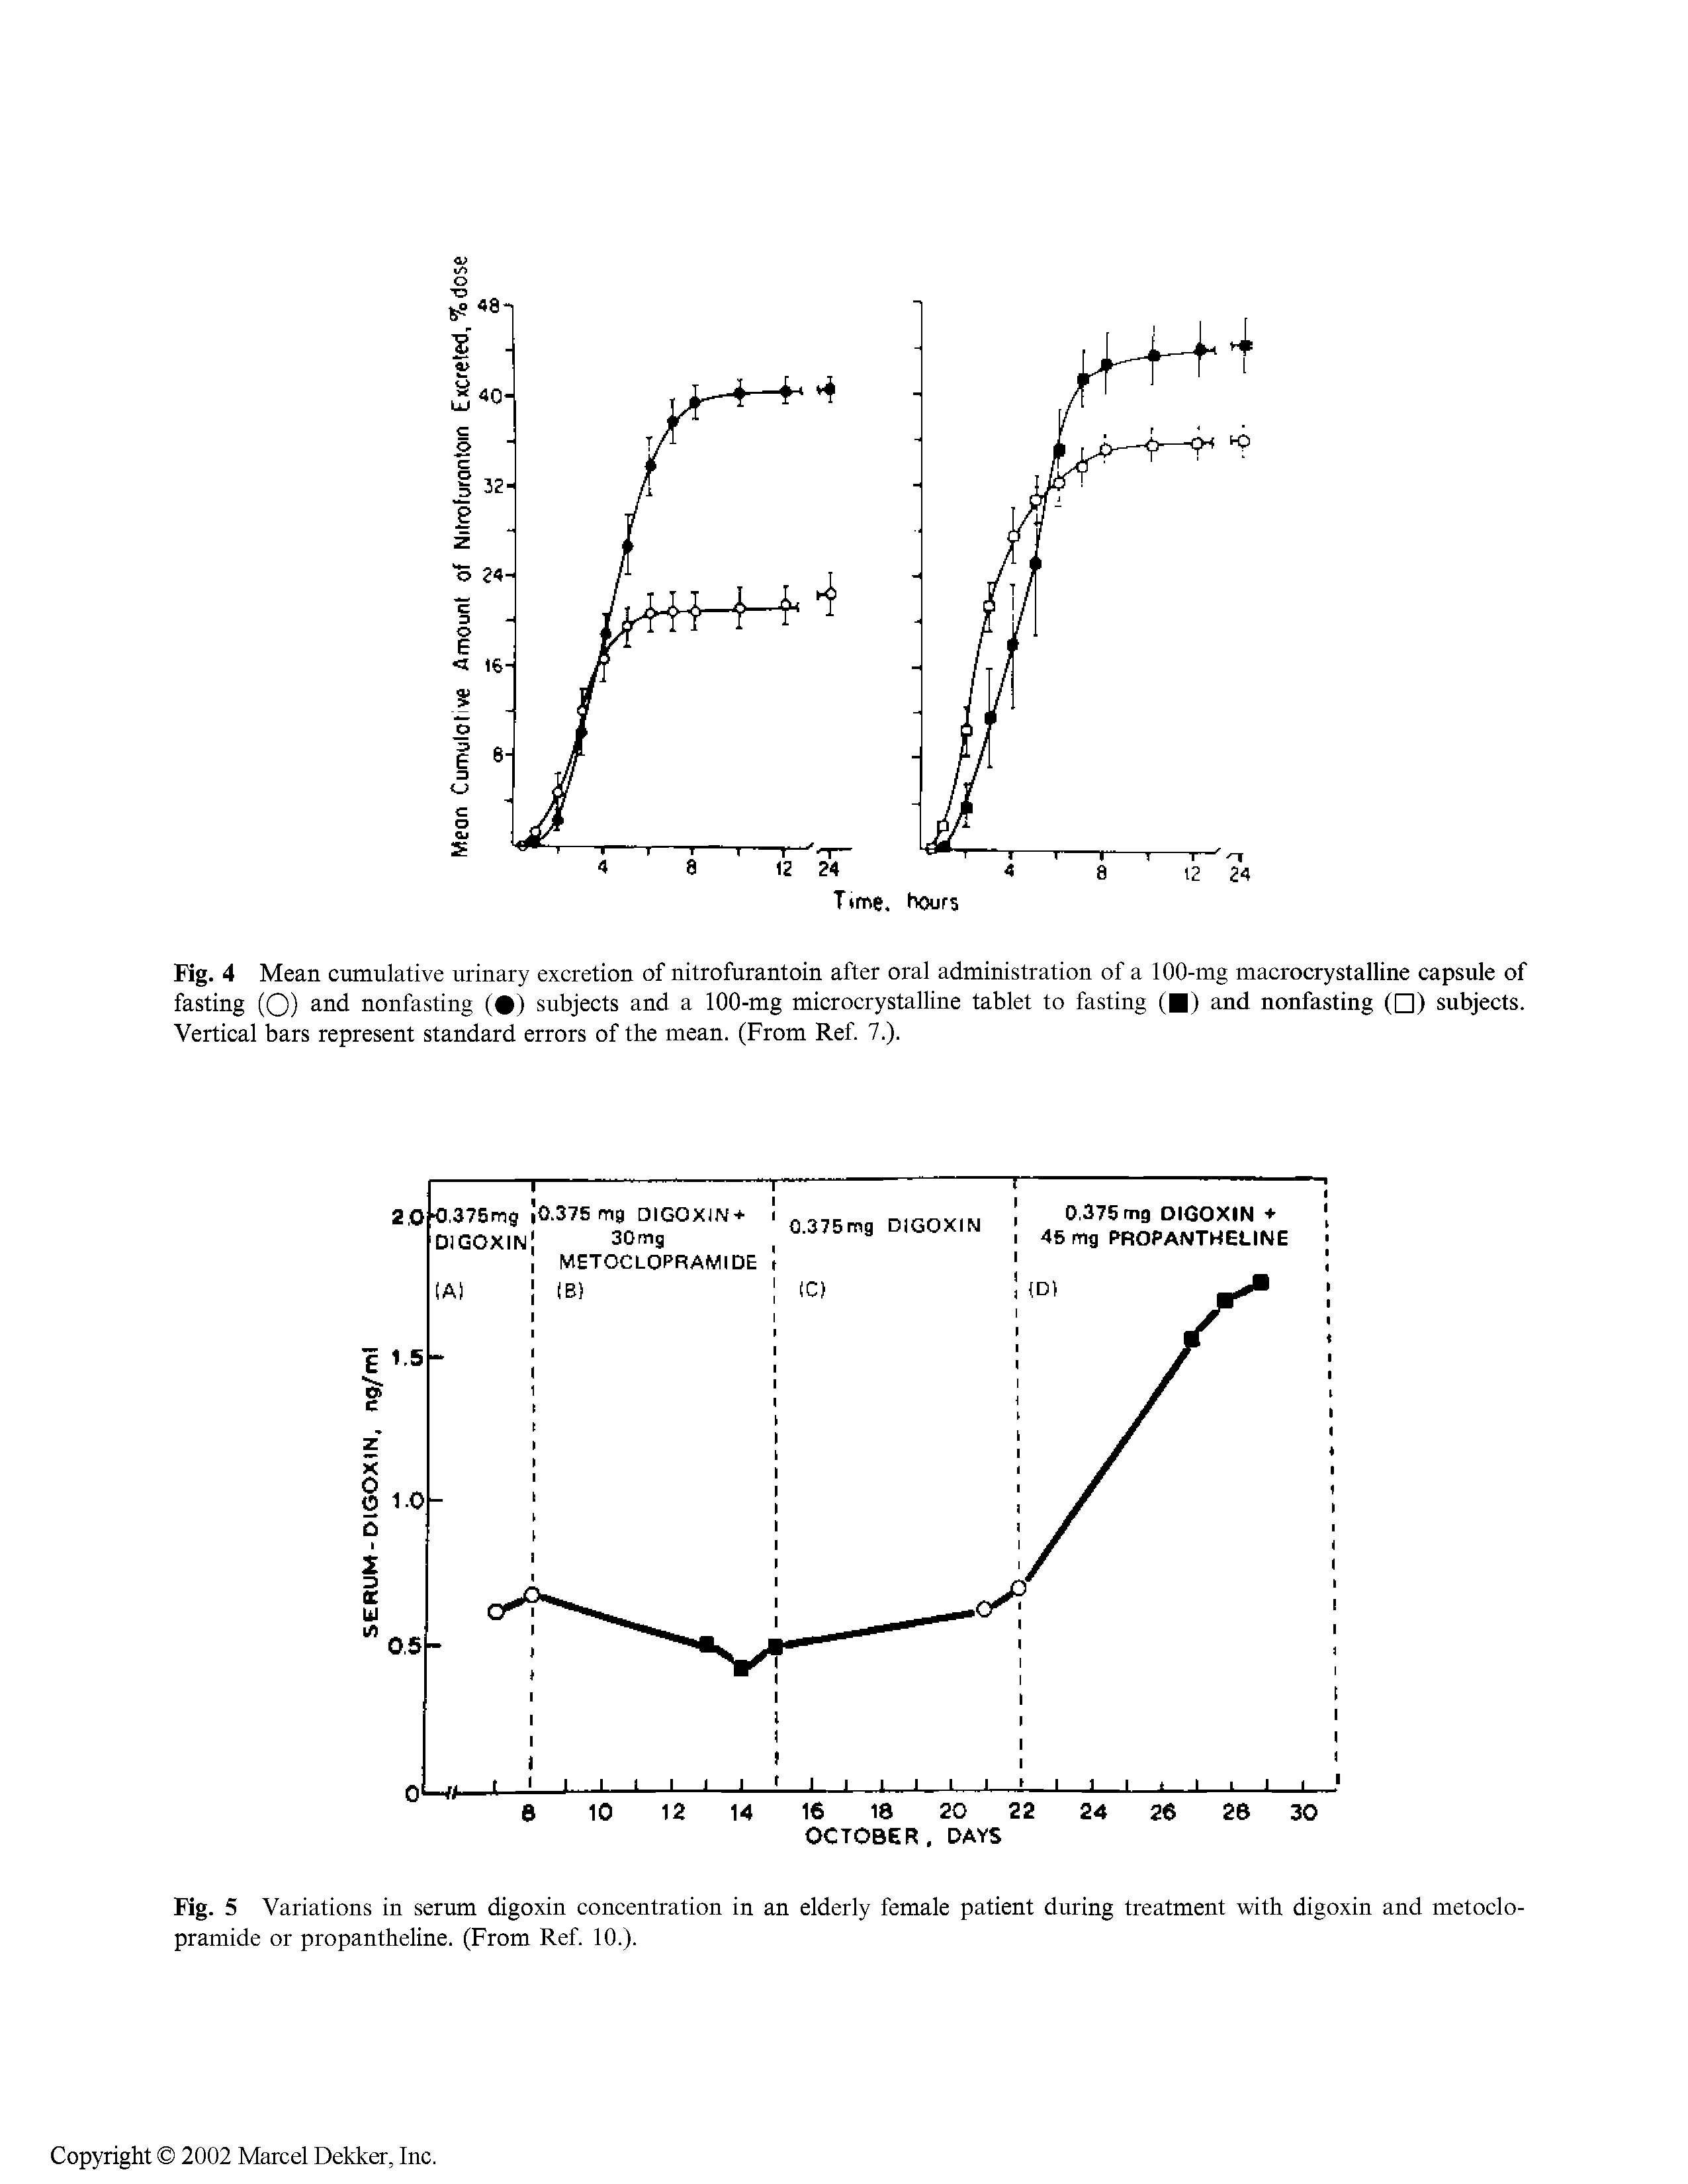 Fig. 4 Mean cumulative urinary excretion of nitrofurantoin after oral administration of a 100-mg macrocrystalline capsule of fasting (O) and nonfasting ( ) subjects and a 100-mg microcrystalline tablet to fasting ( ) and nonfasting ( ) subjects. Vertical bars represent standard errors of the mean. (From Ref. 7.).